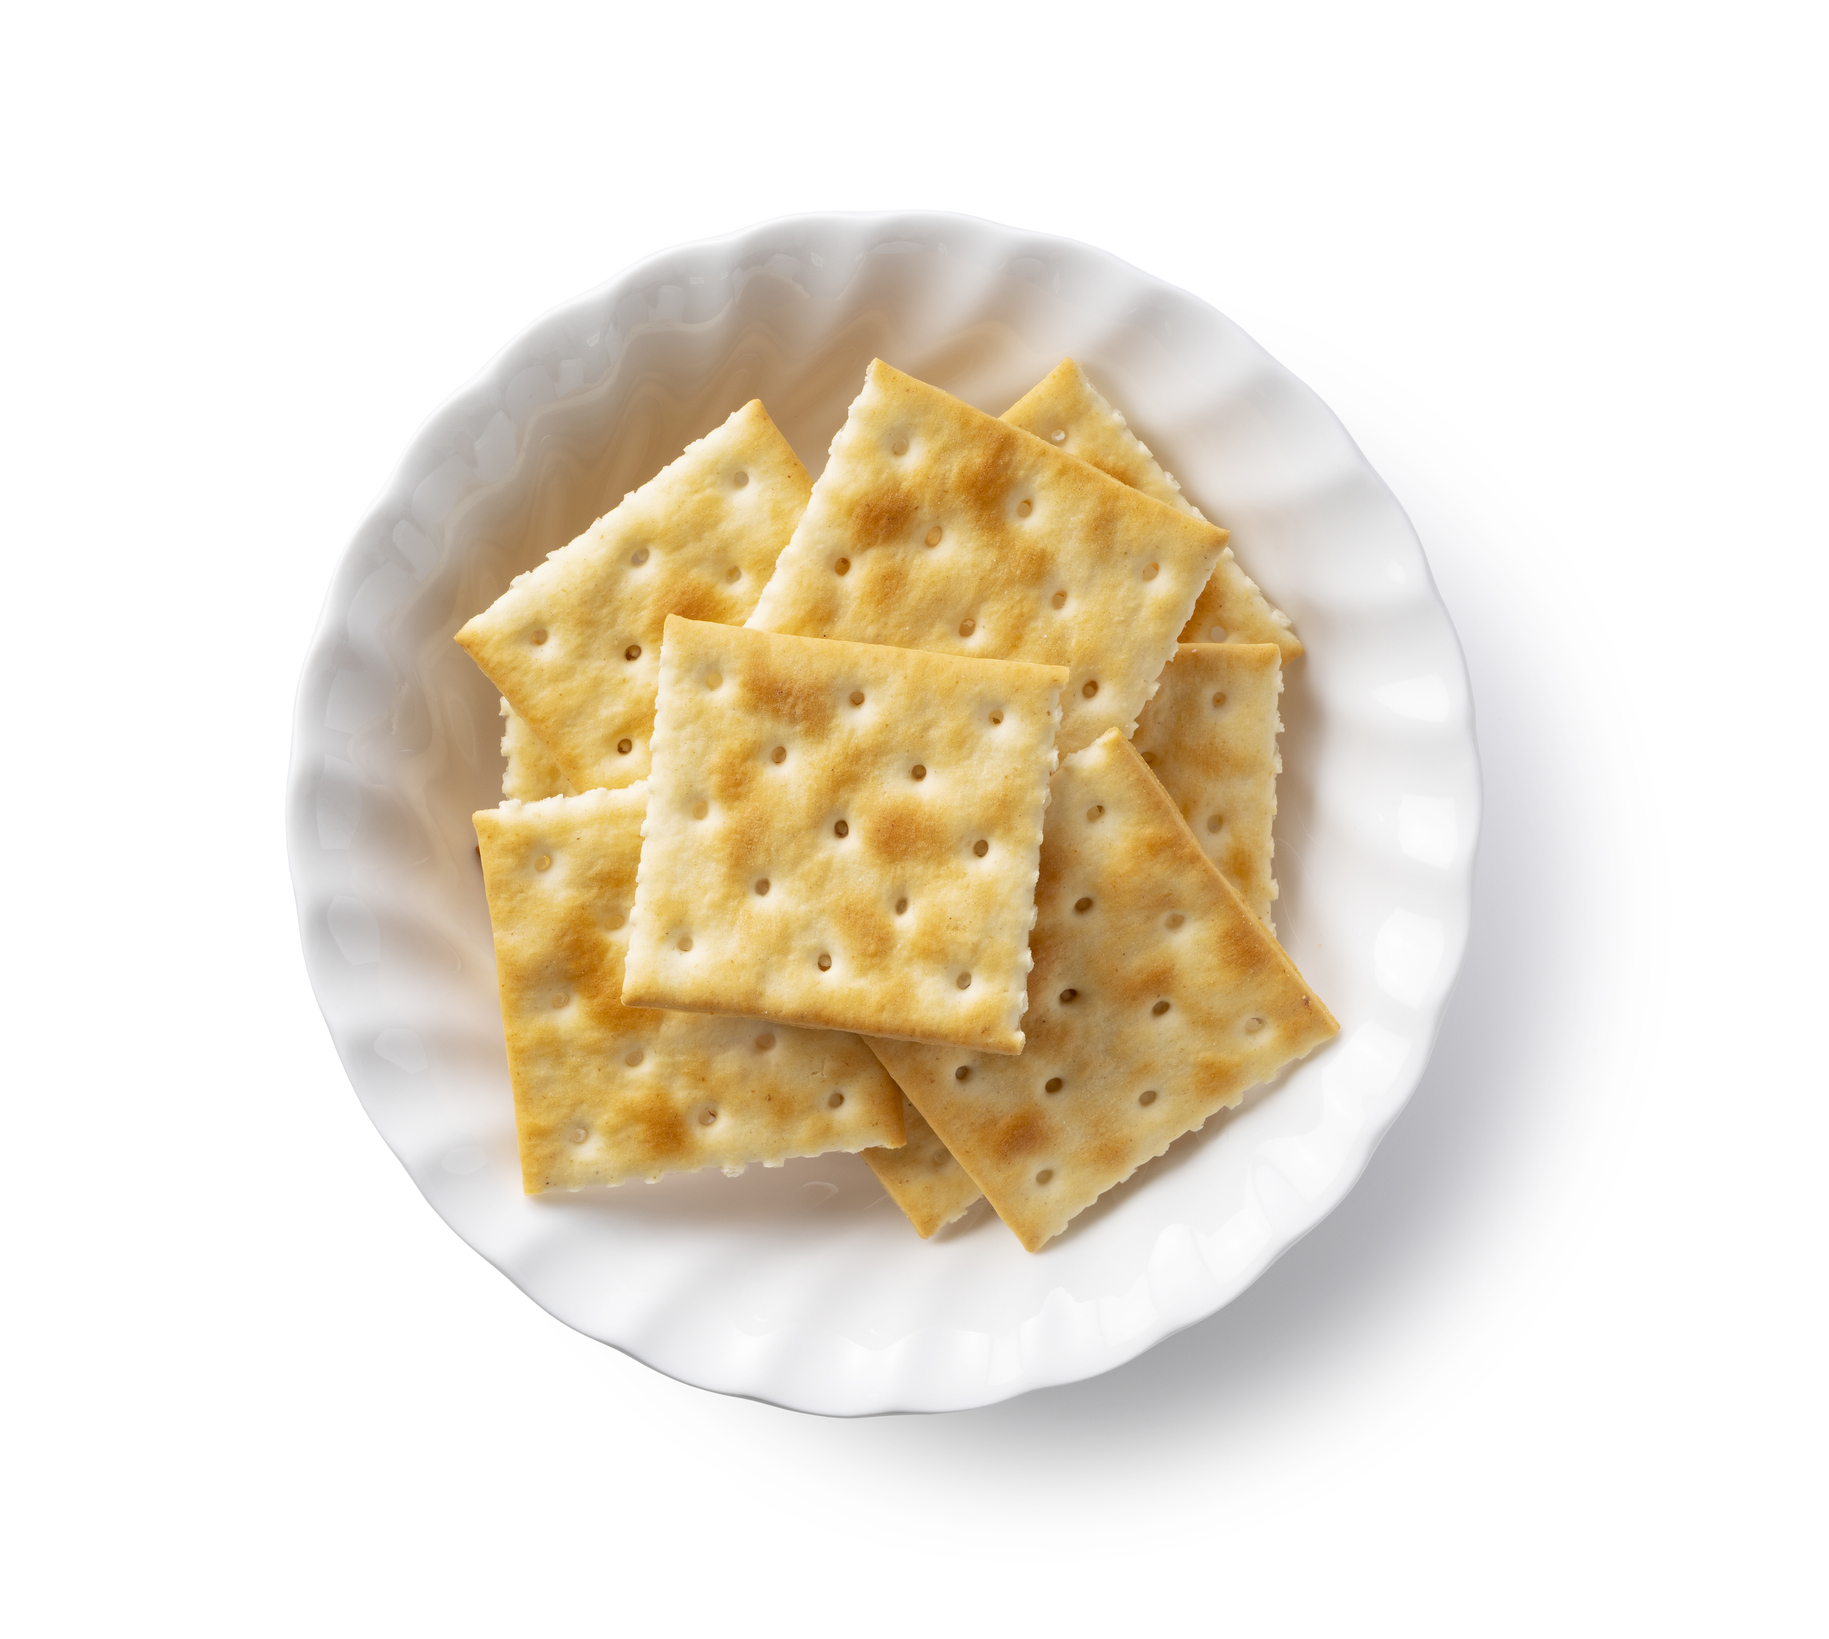 Are Saltine Crackers Healthy To Eat? - Ethical Inc